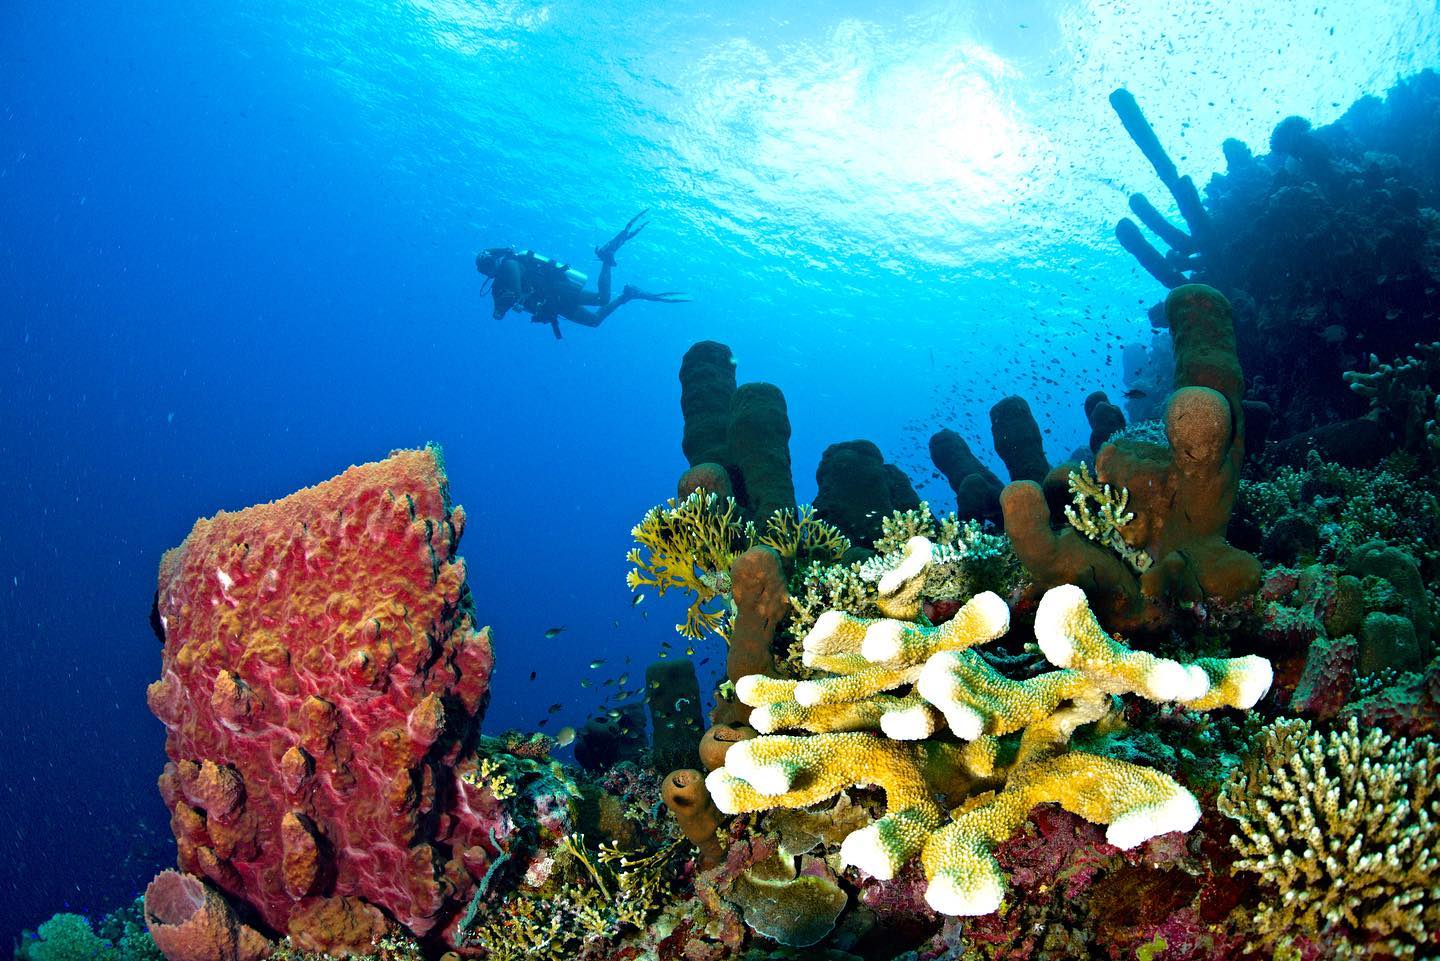 Scuba diving in Togeans healthy reefs